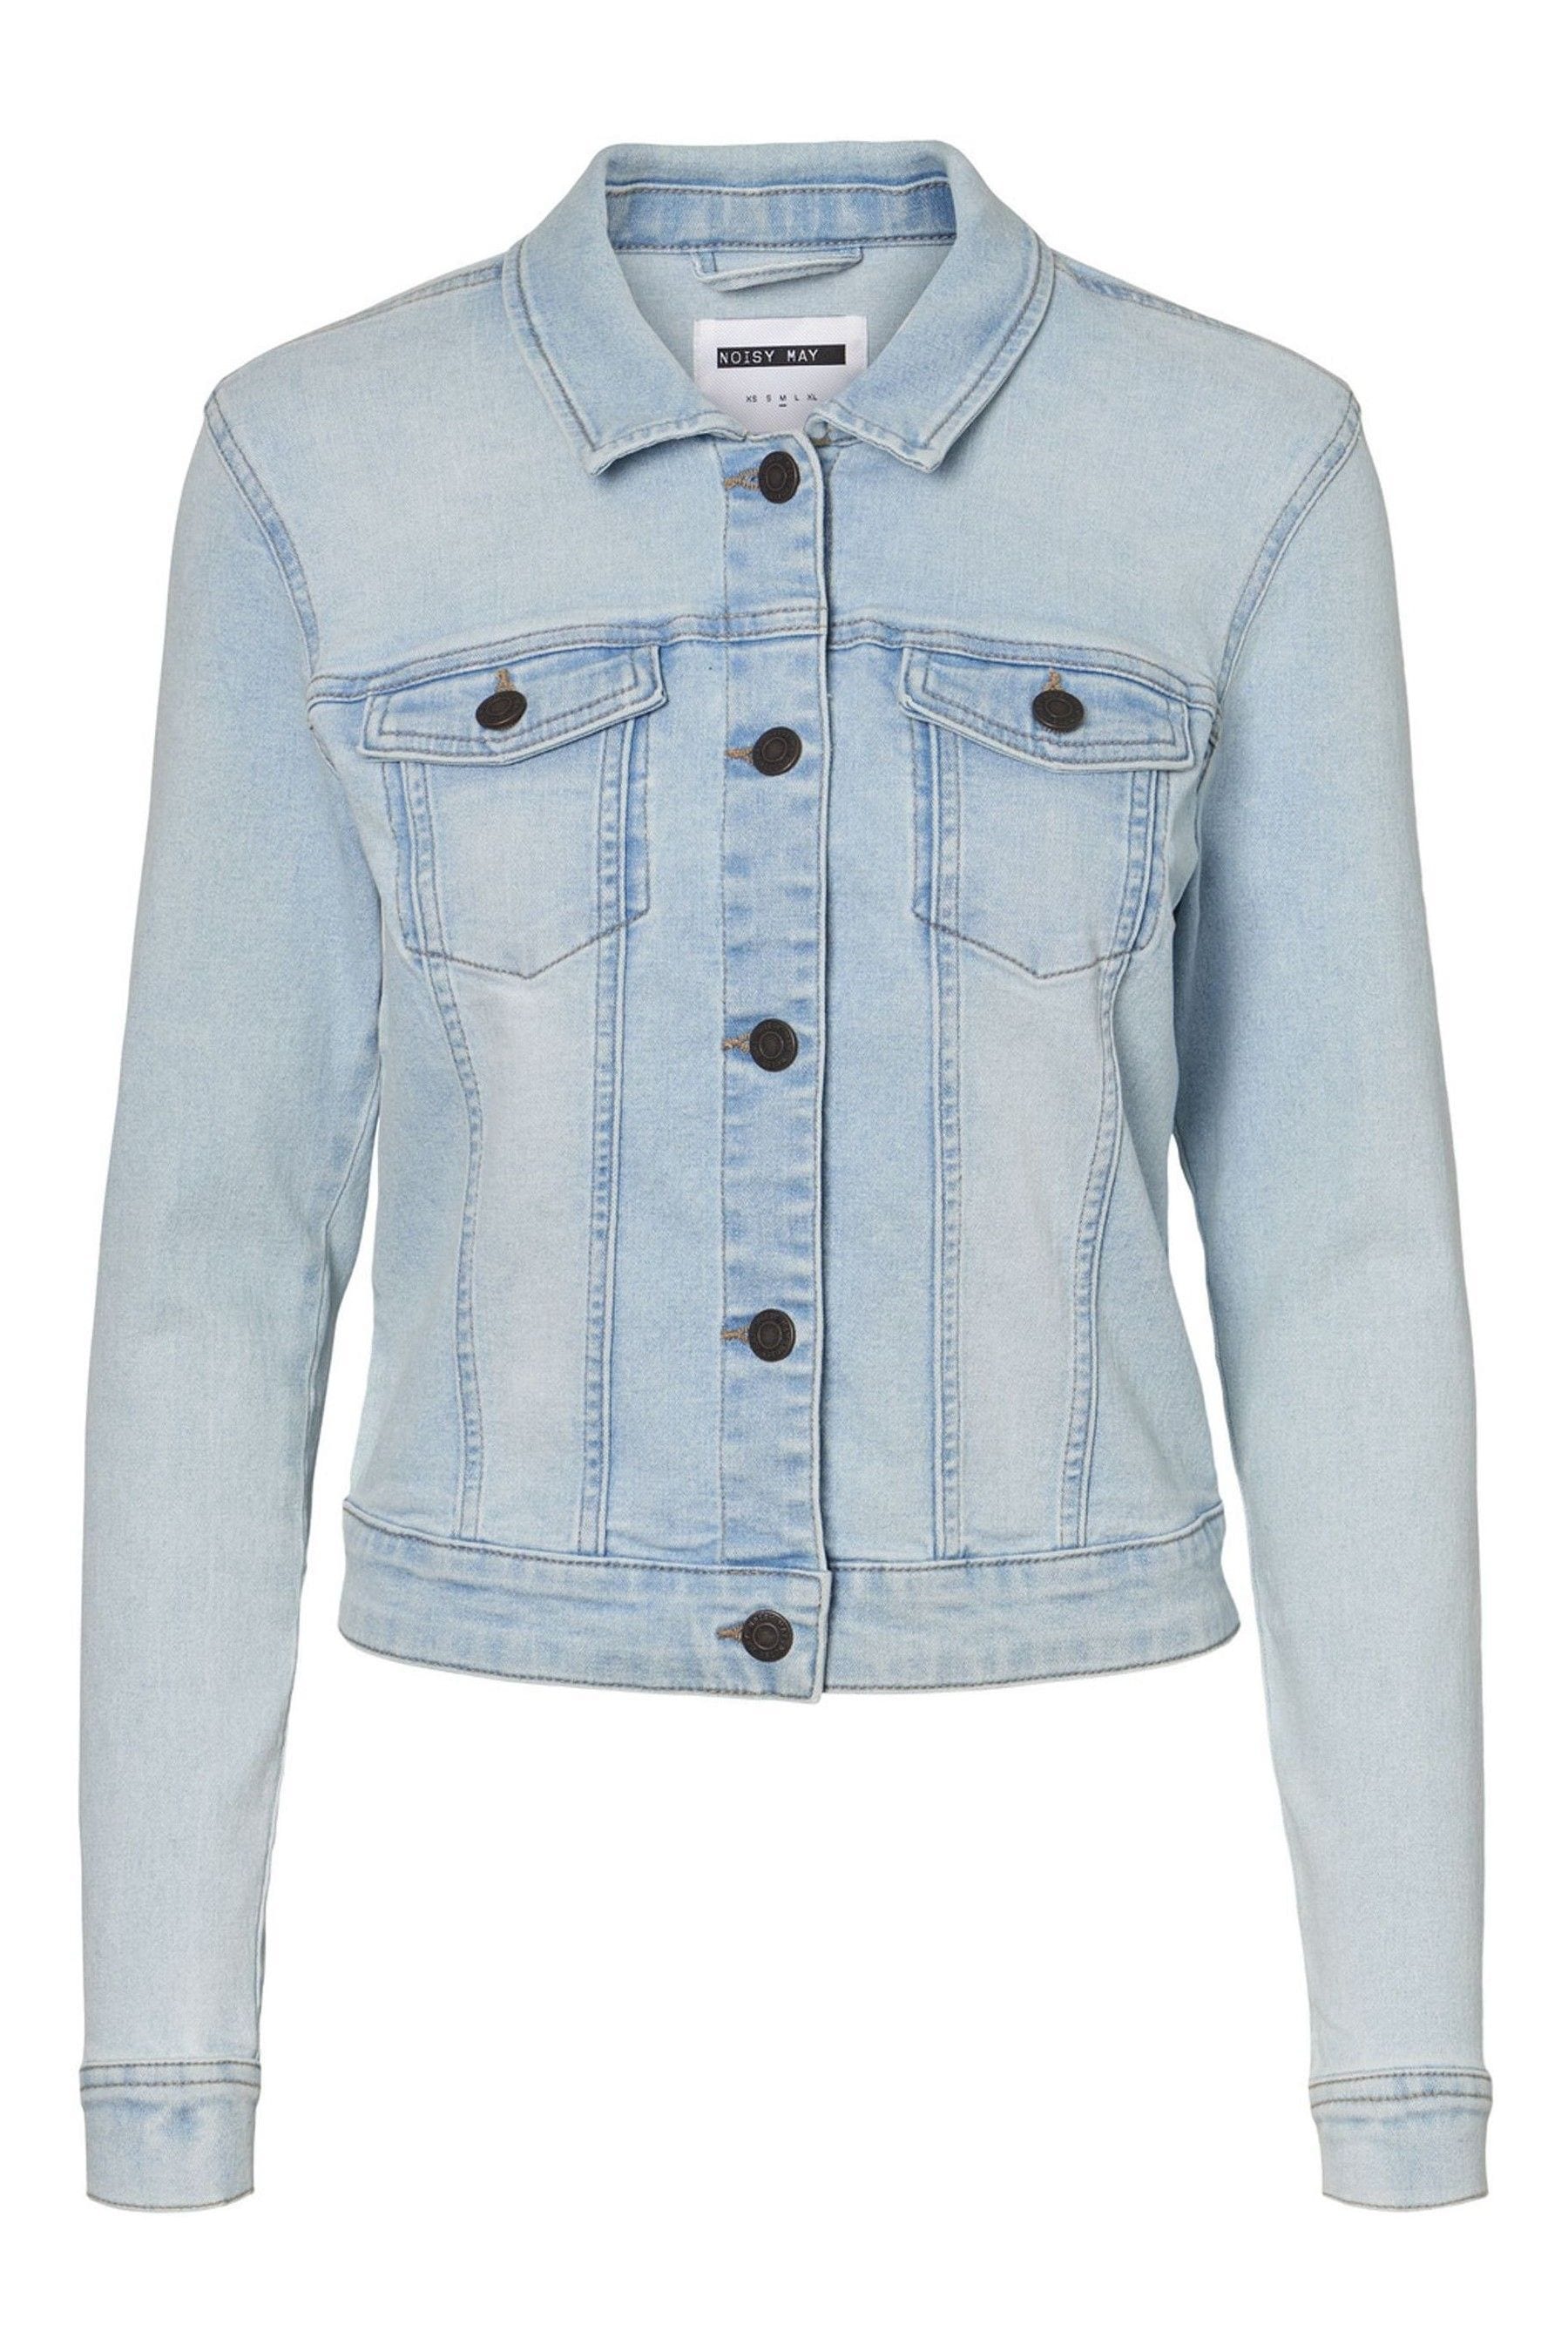 Buy NOISY MAY Light Blue Denim Fitted Denim Jacket from the Next UK ...